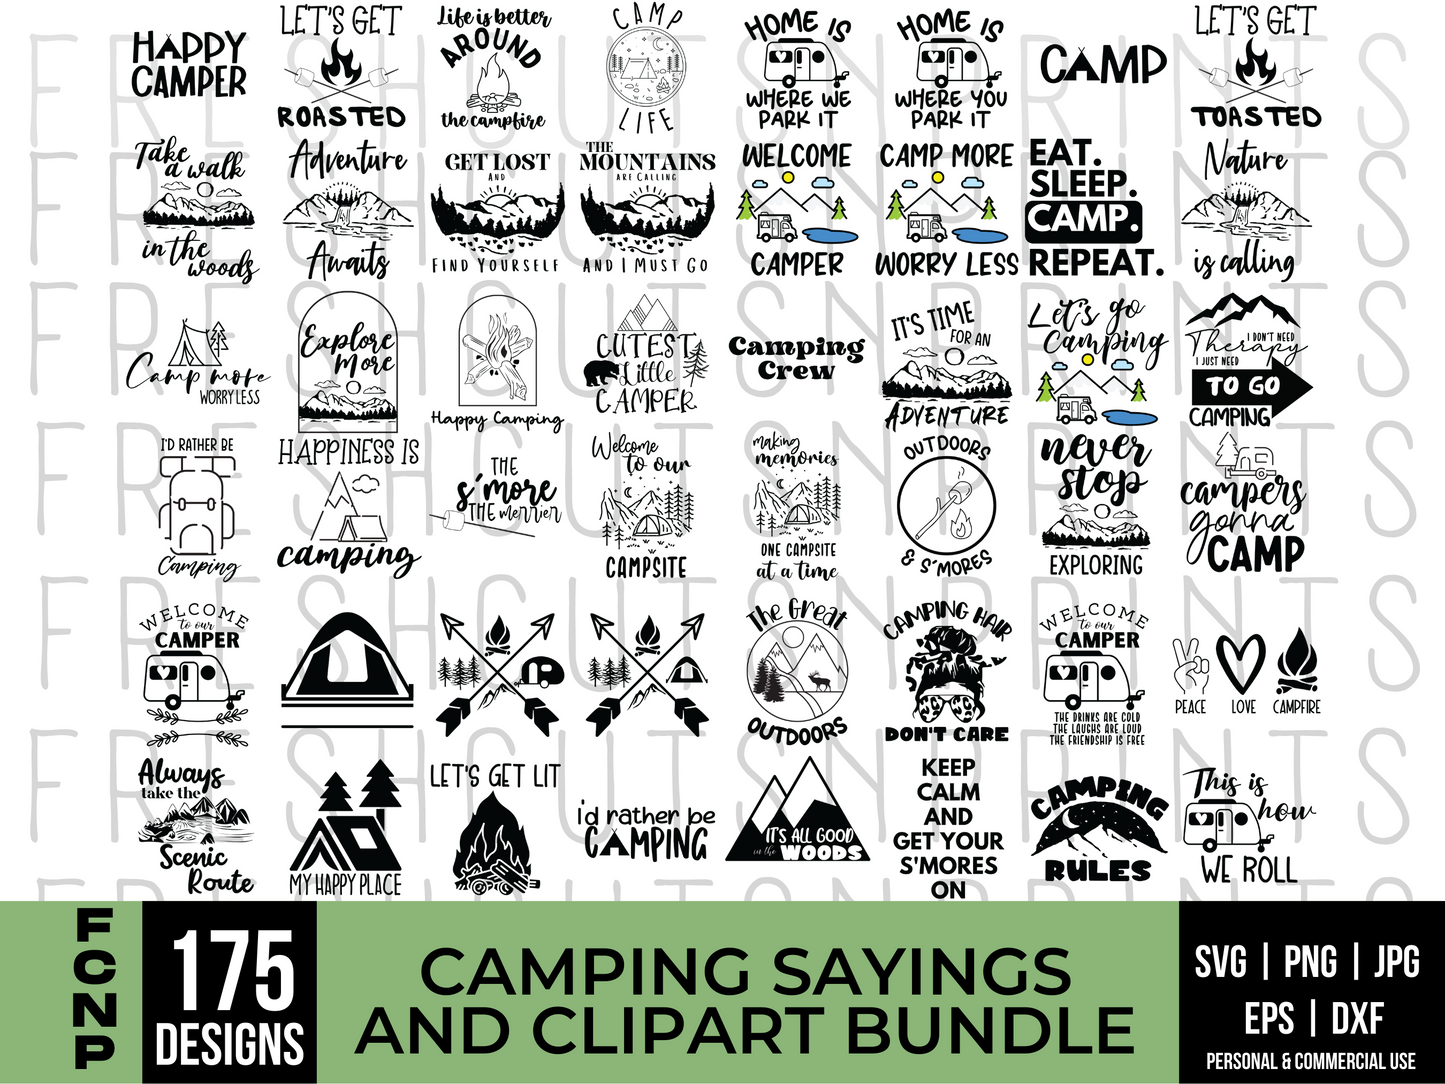 Camping SVG, Camping Quotes svg, Camping Clipart, Camping Shirt svg, Happy Camper svg, Outdoors svg, Mountain SVG, Summer SVG